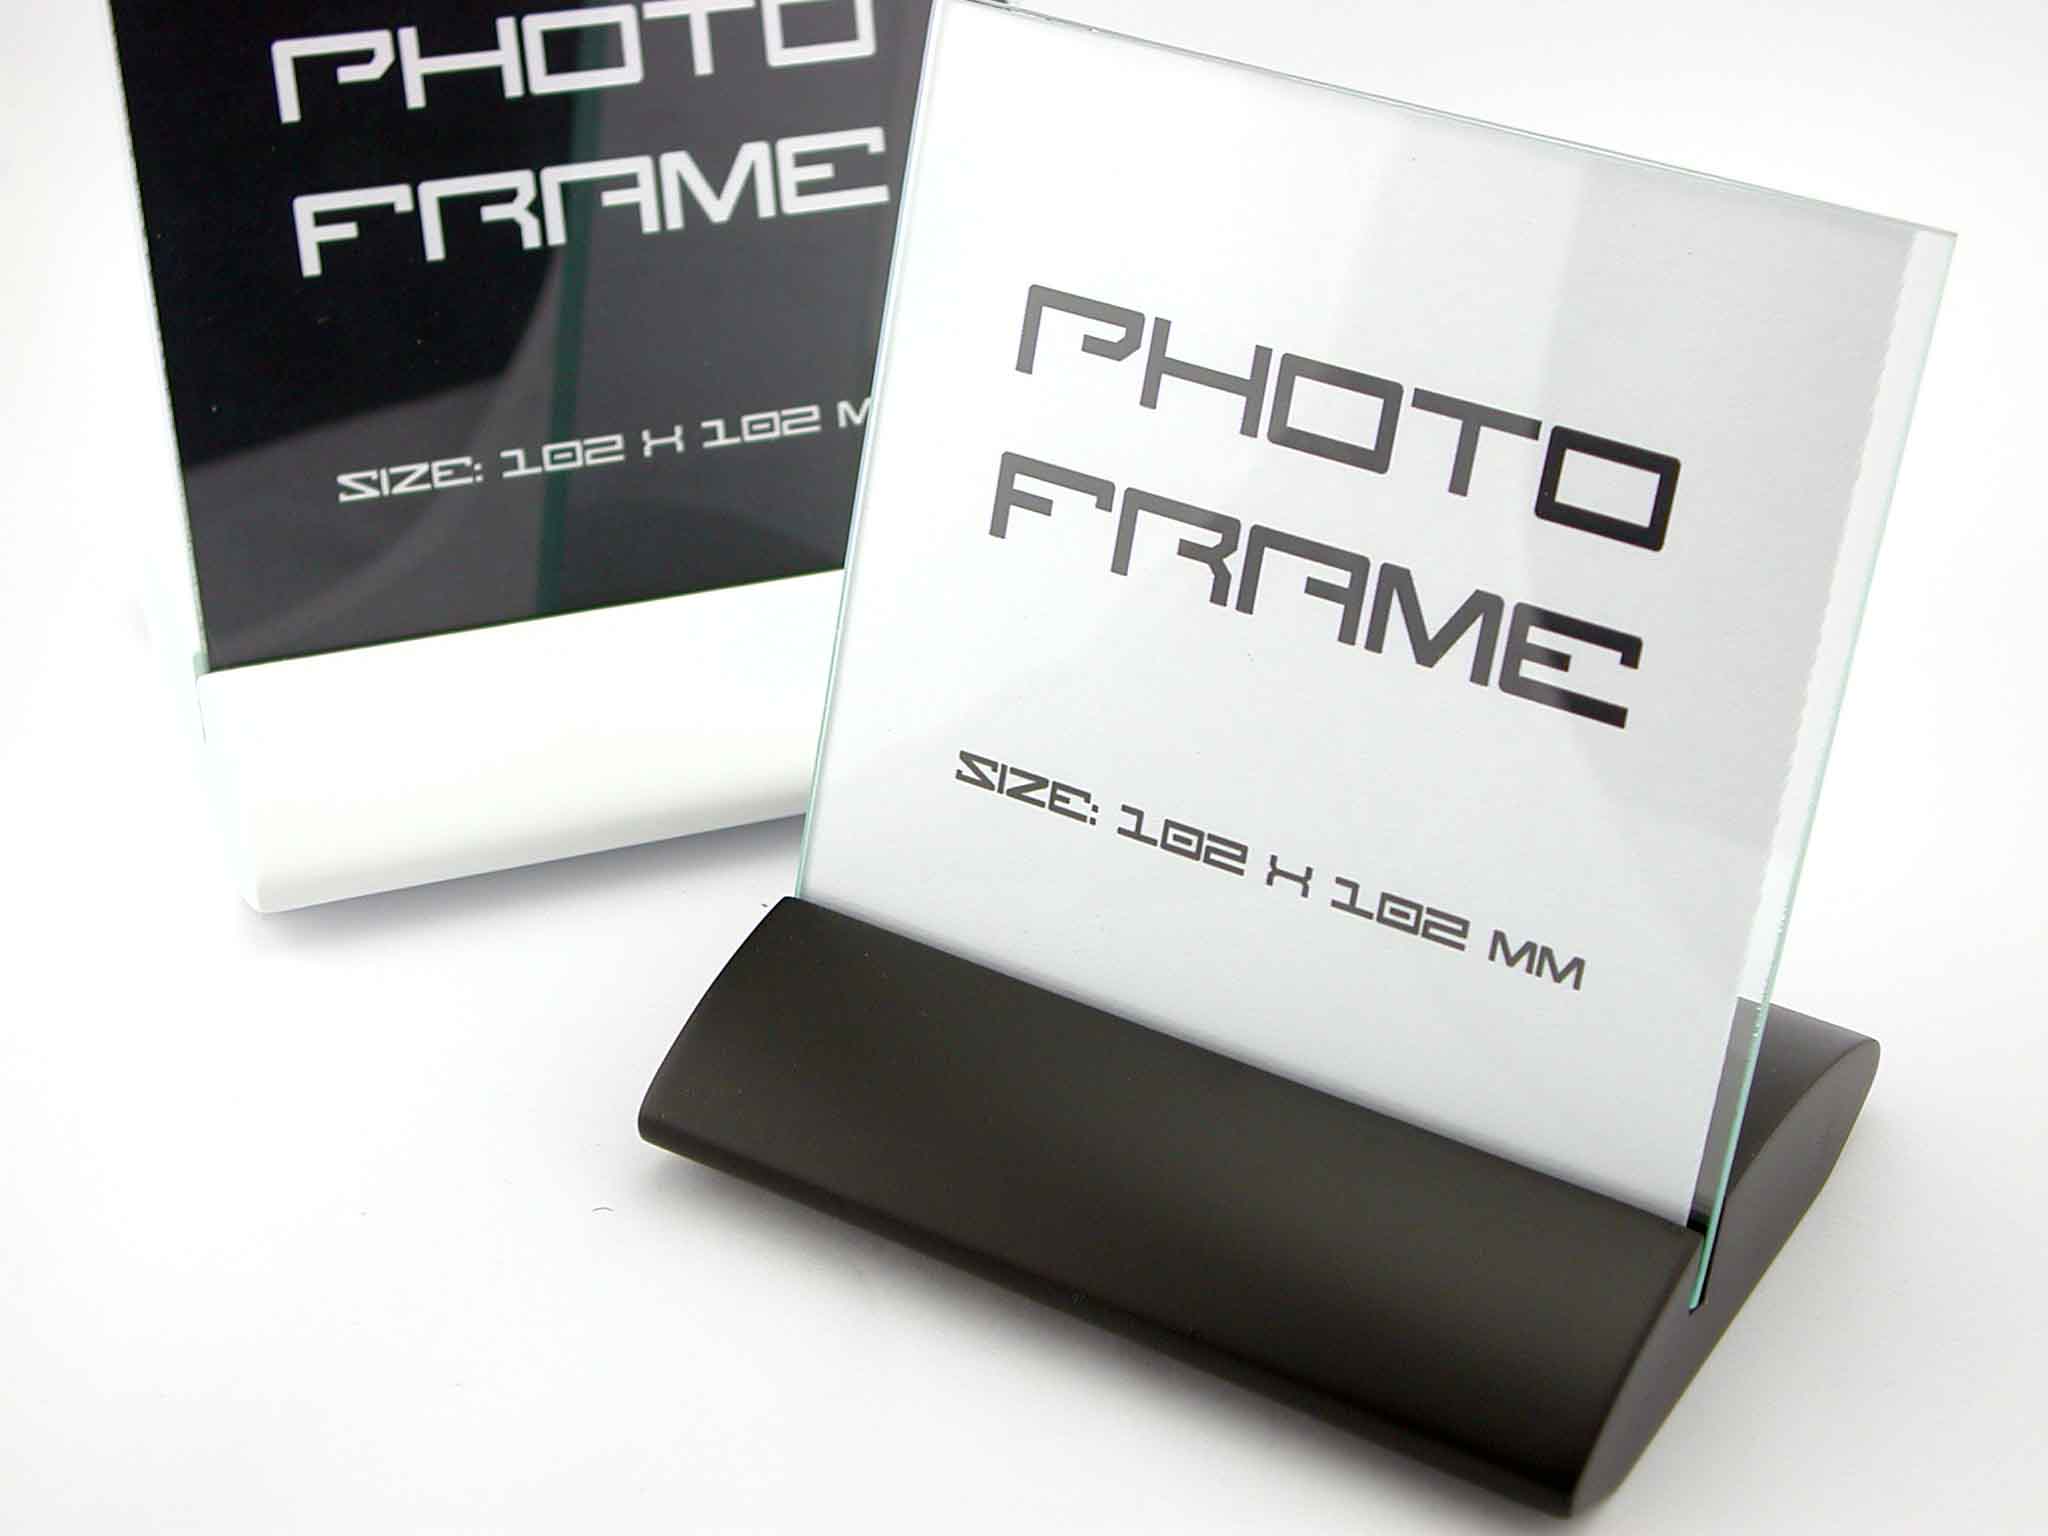  our item - Photo Frame With MDF Wooden Base ( our item - Photo Frame With MDF Wooden Base)